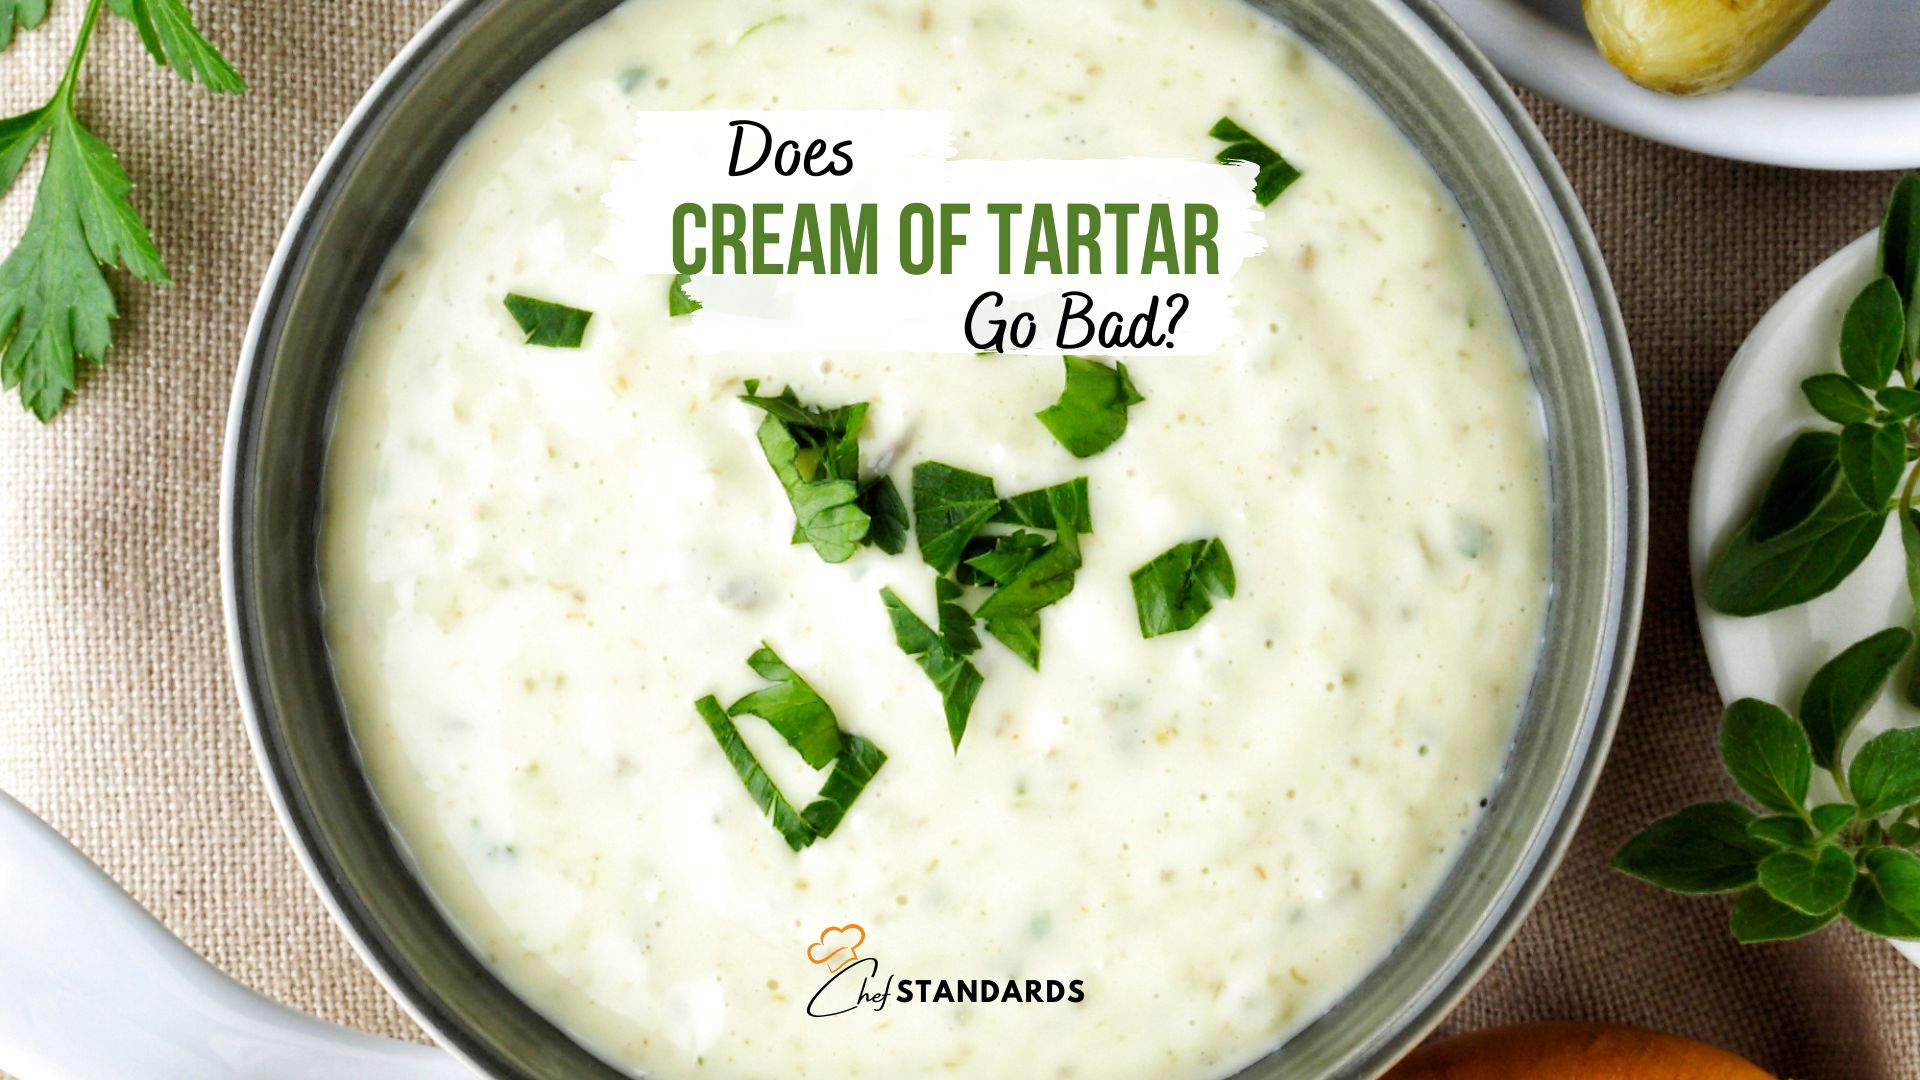 Does Cream Of Tartar Go Bad And What Are The Red Flags?